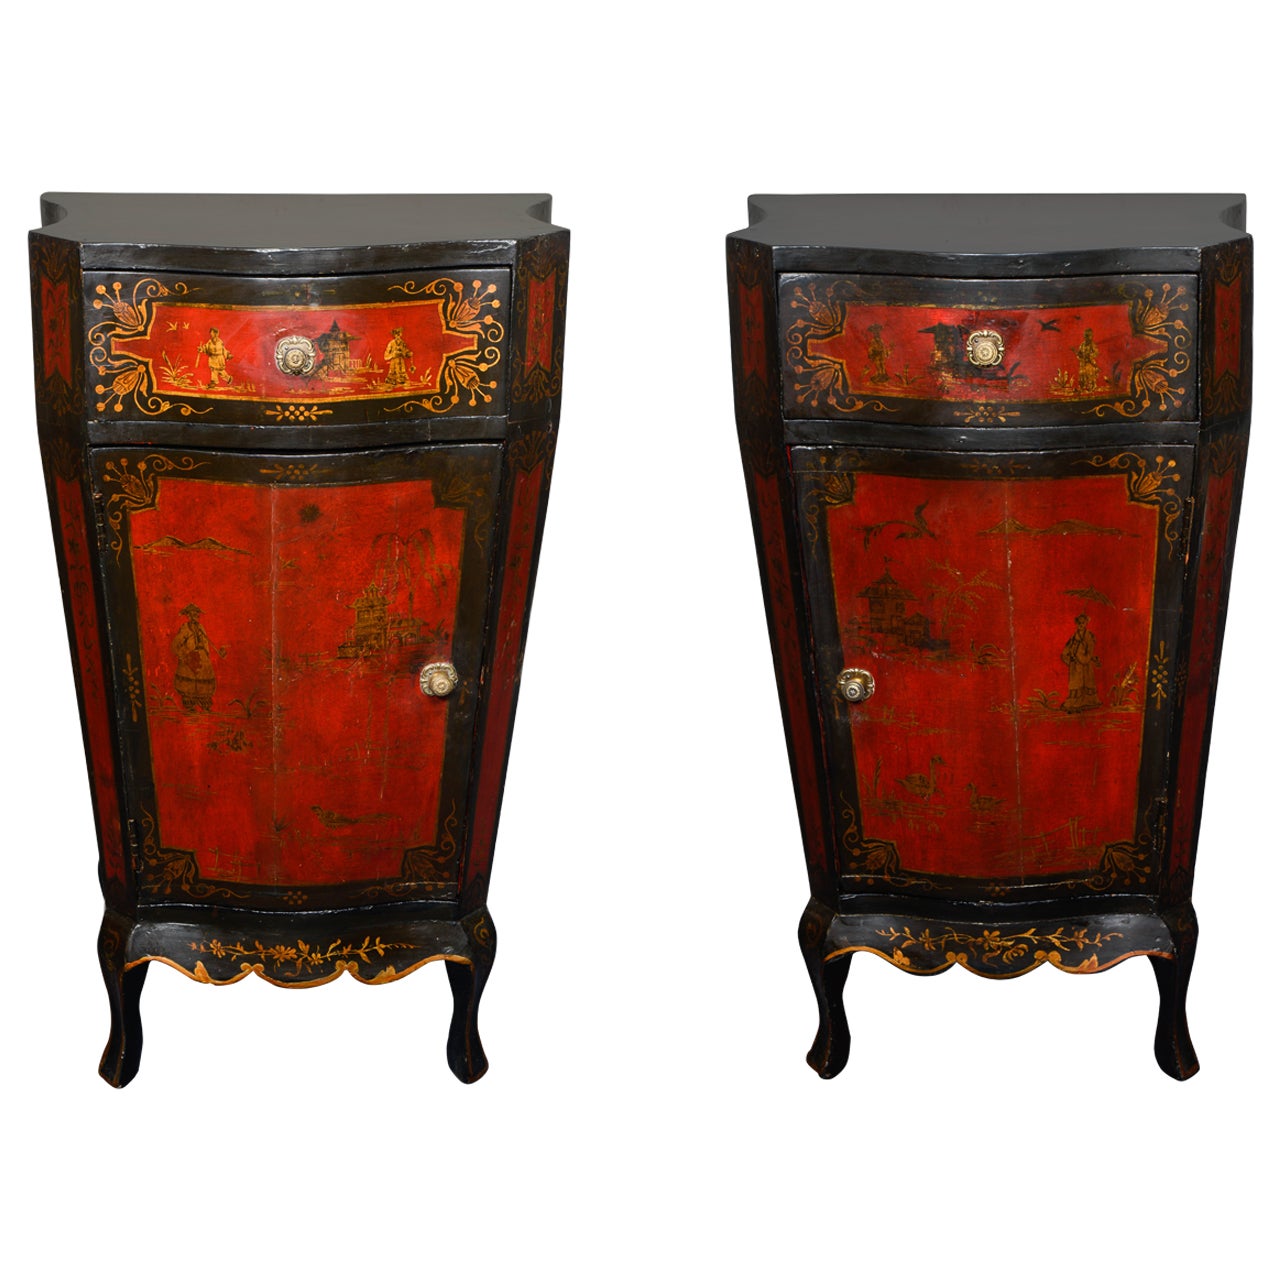 Pair of Red Lacquer "Bout de Canapé" For Sale